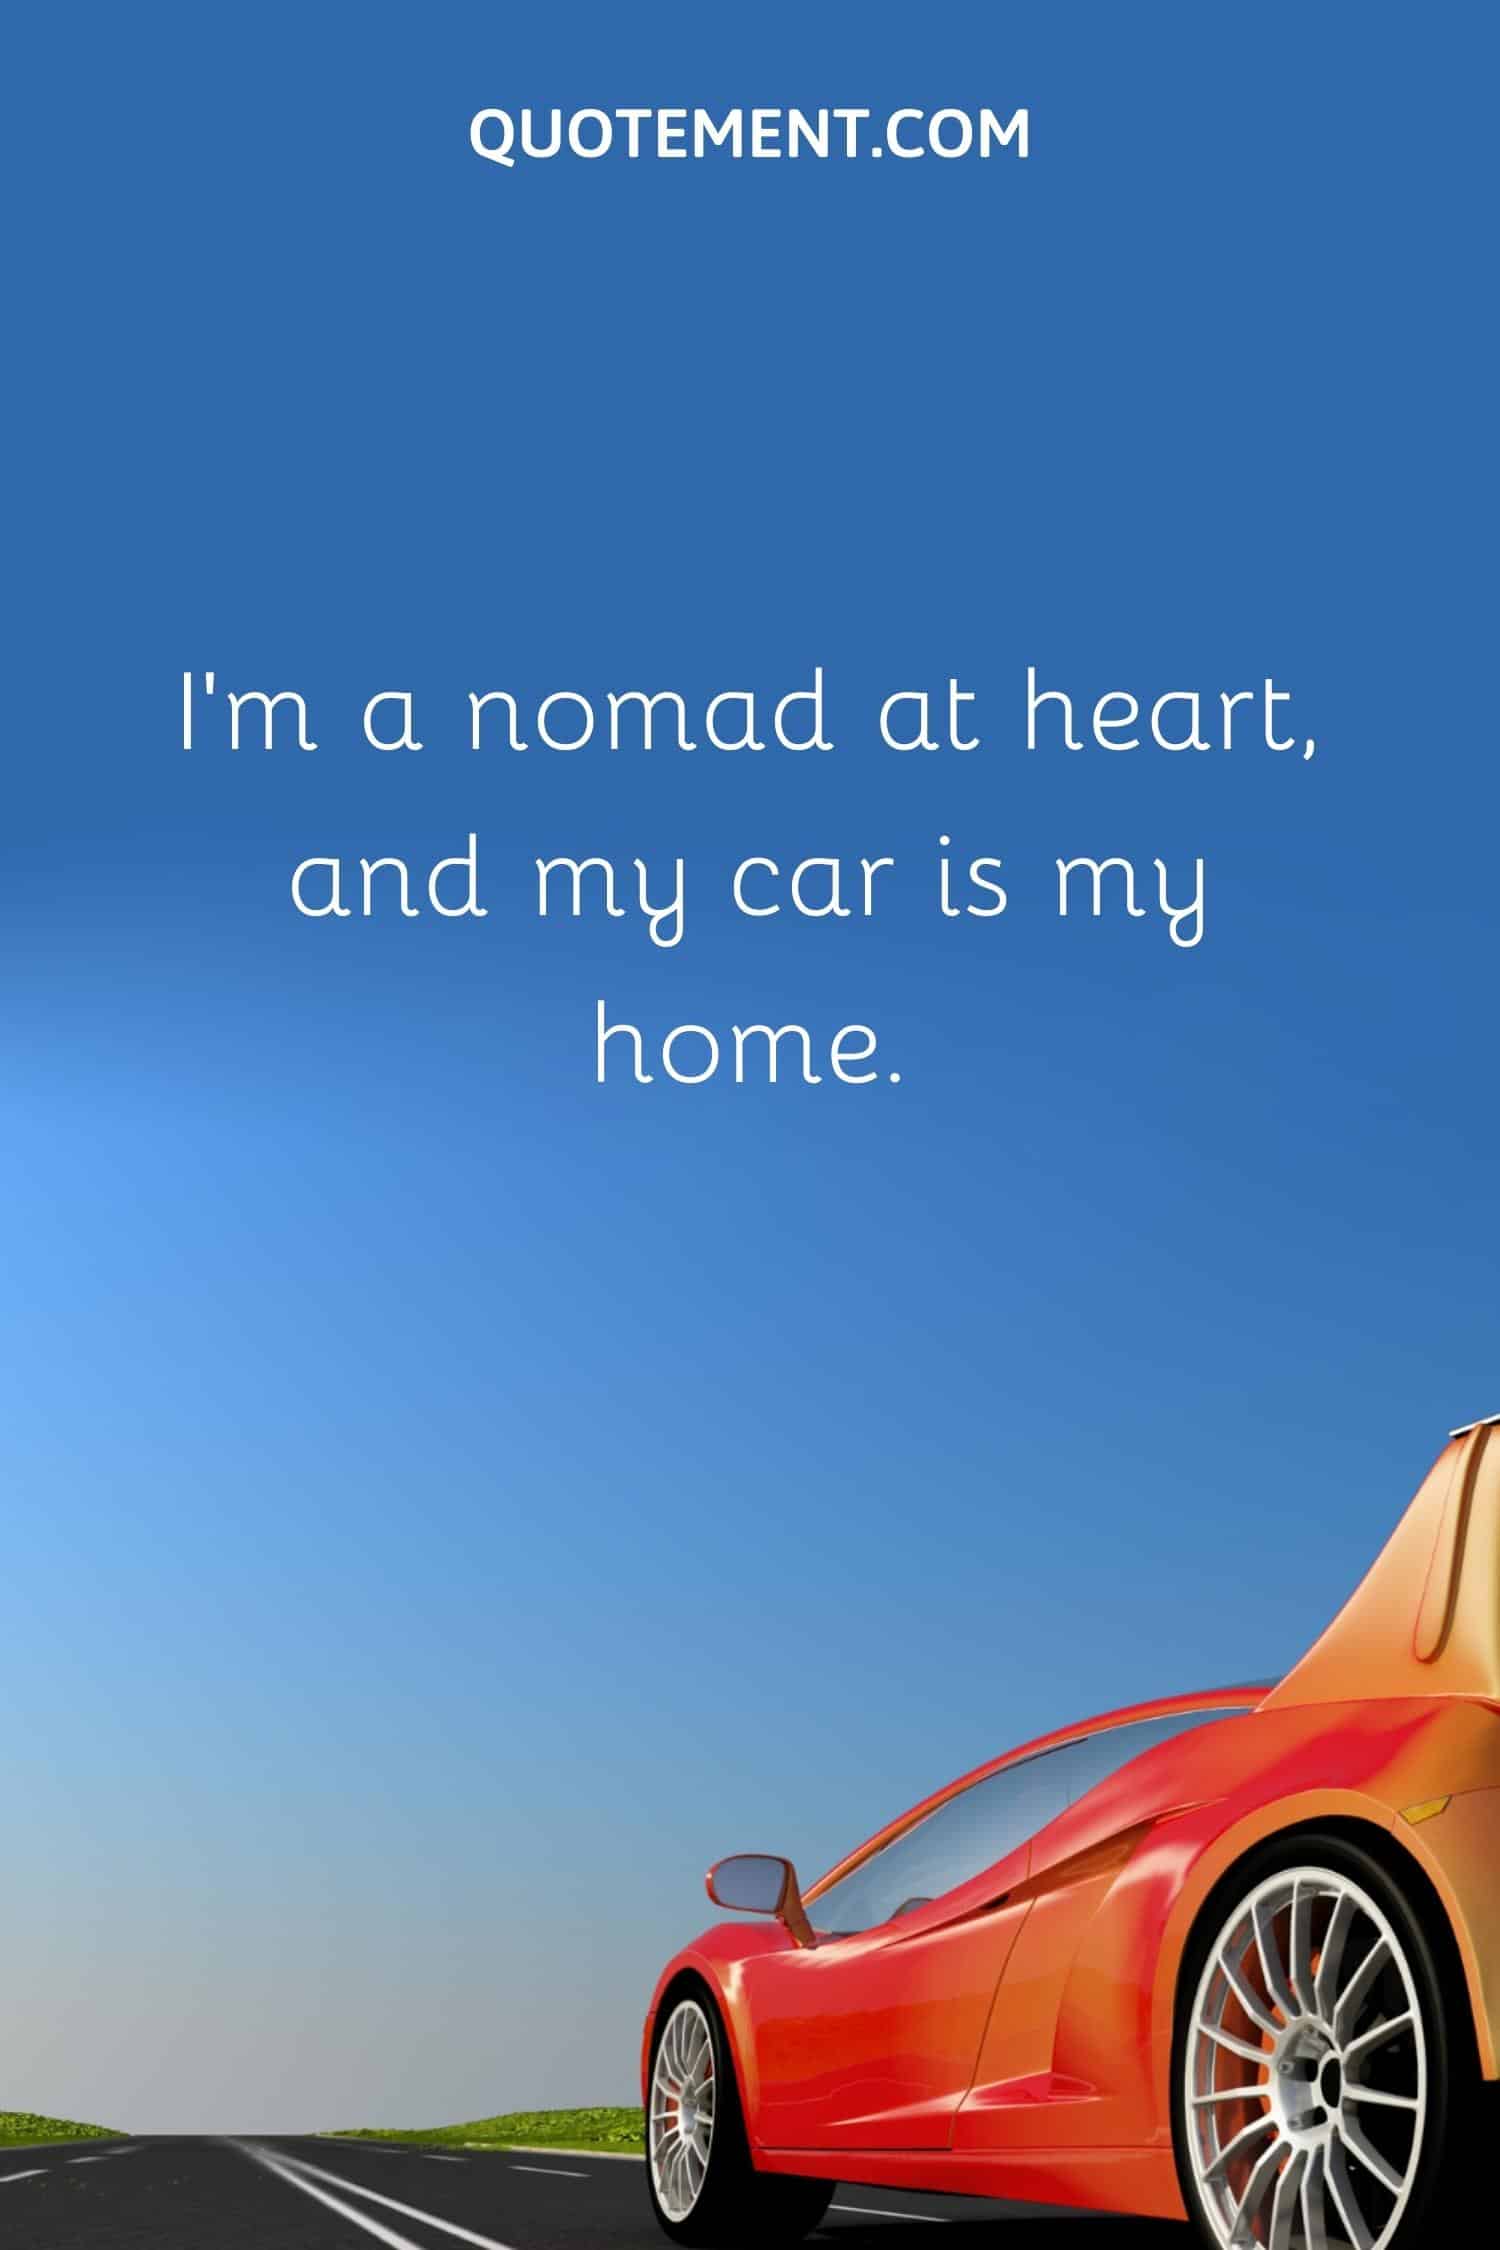 I'm a nomad at heart, and my car is my home